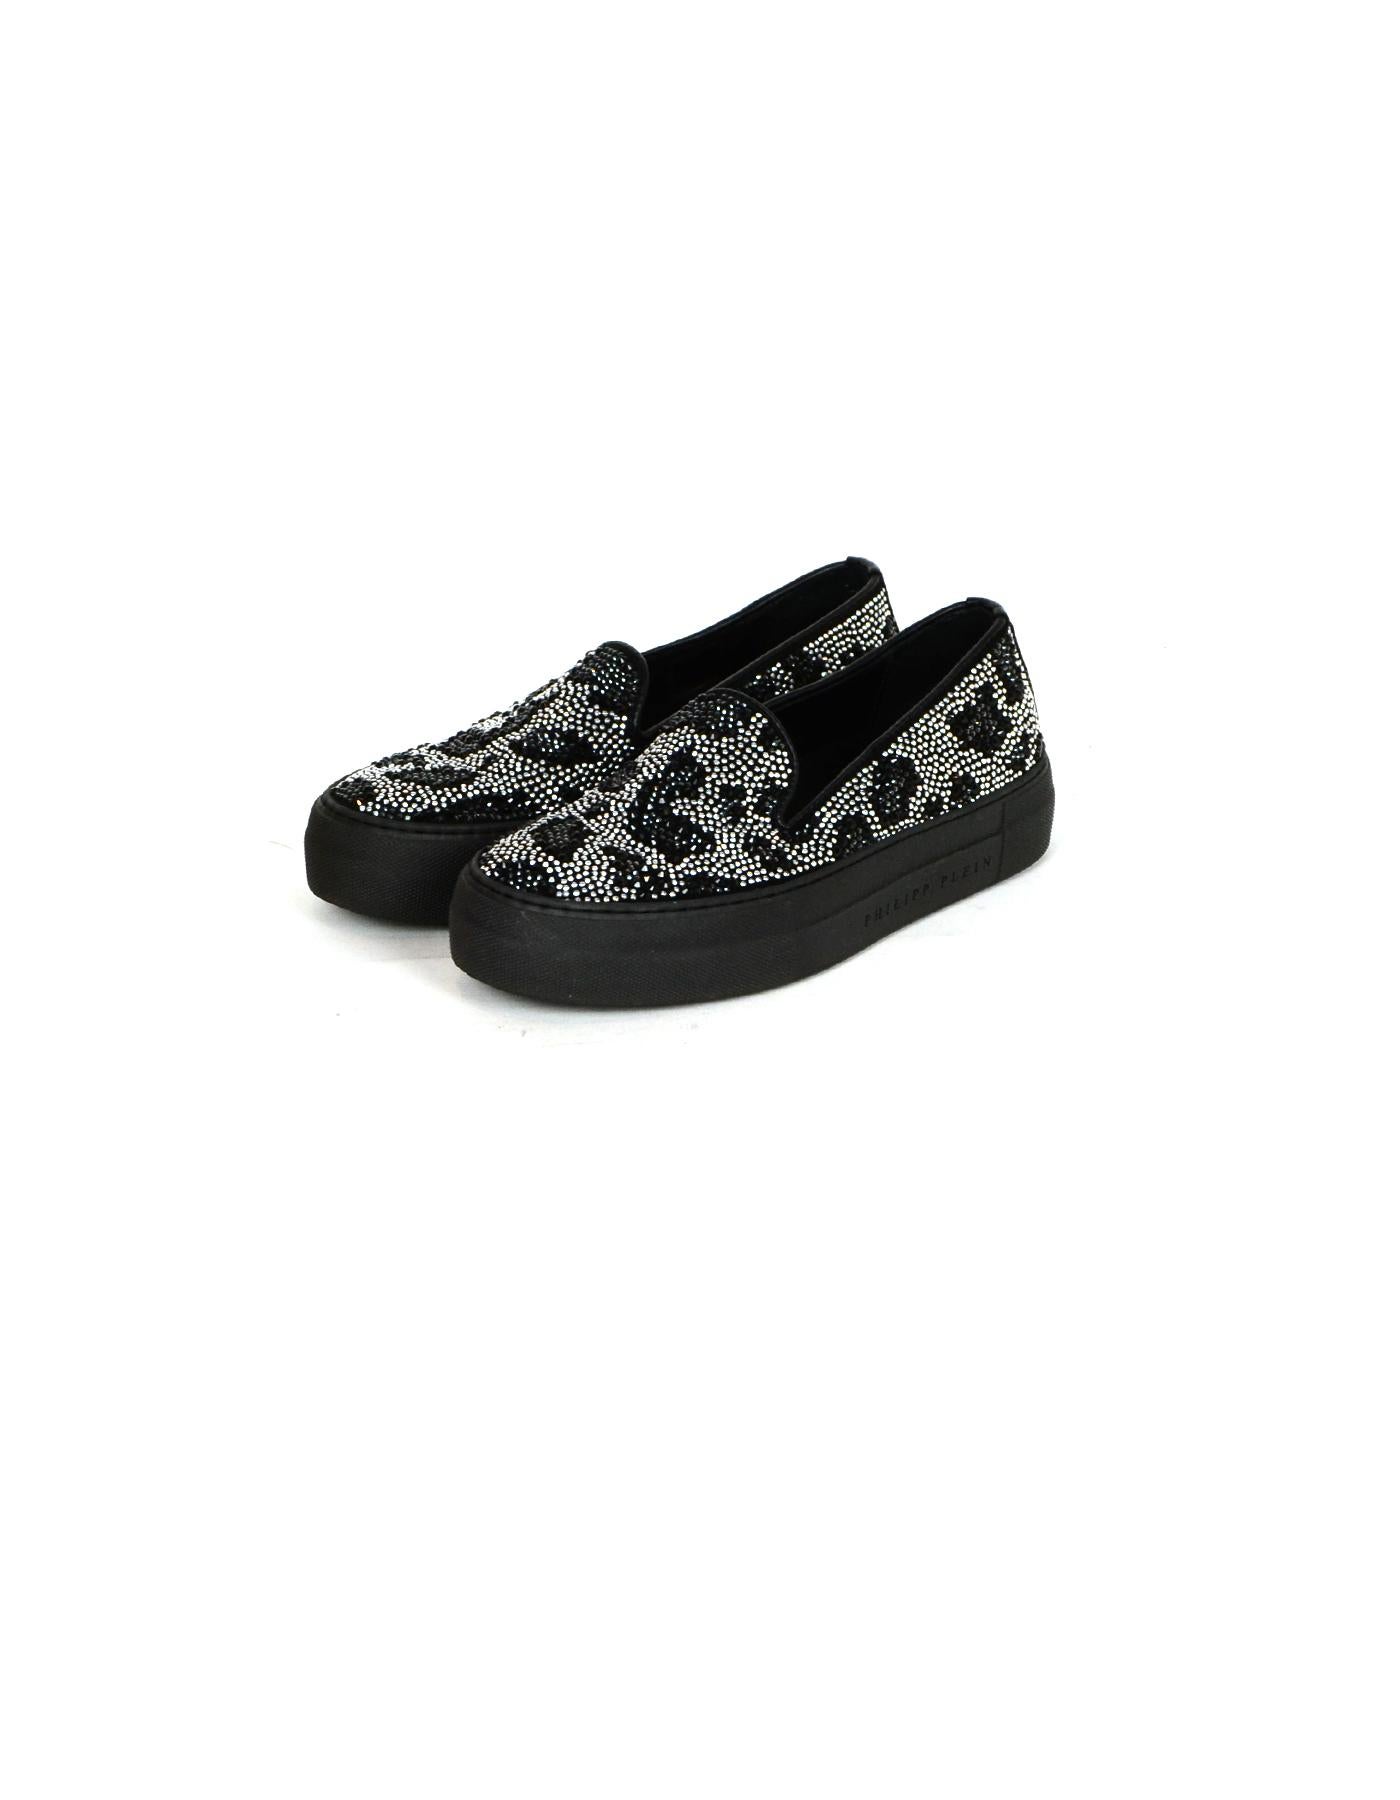 Philipp Plein Black Silver Leopard Print Crystal Sneakers sz 36

Made In: Italy
Color: Black
Hardware: Crystalline
Materials: Leather
Closure/Opening: Slip on
Overall Condition: Excellent pre-owned condition, light scratches along the bottom and the